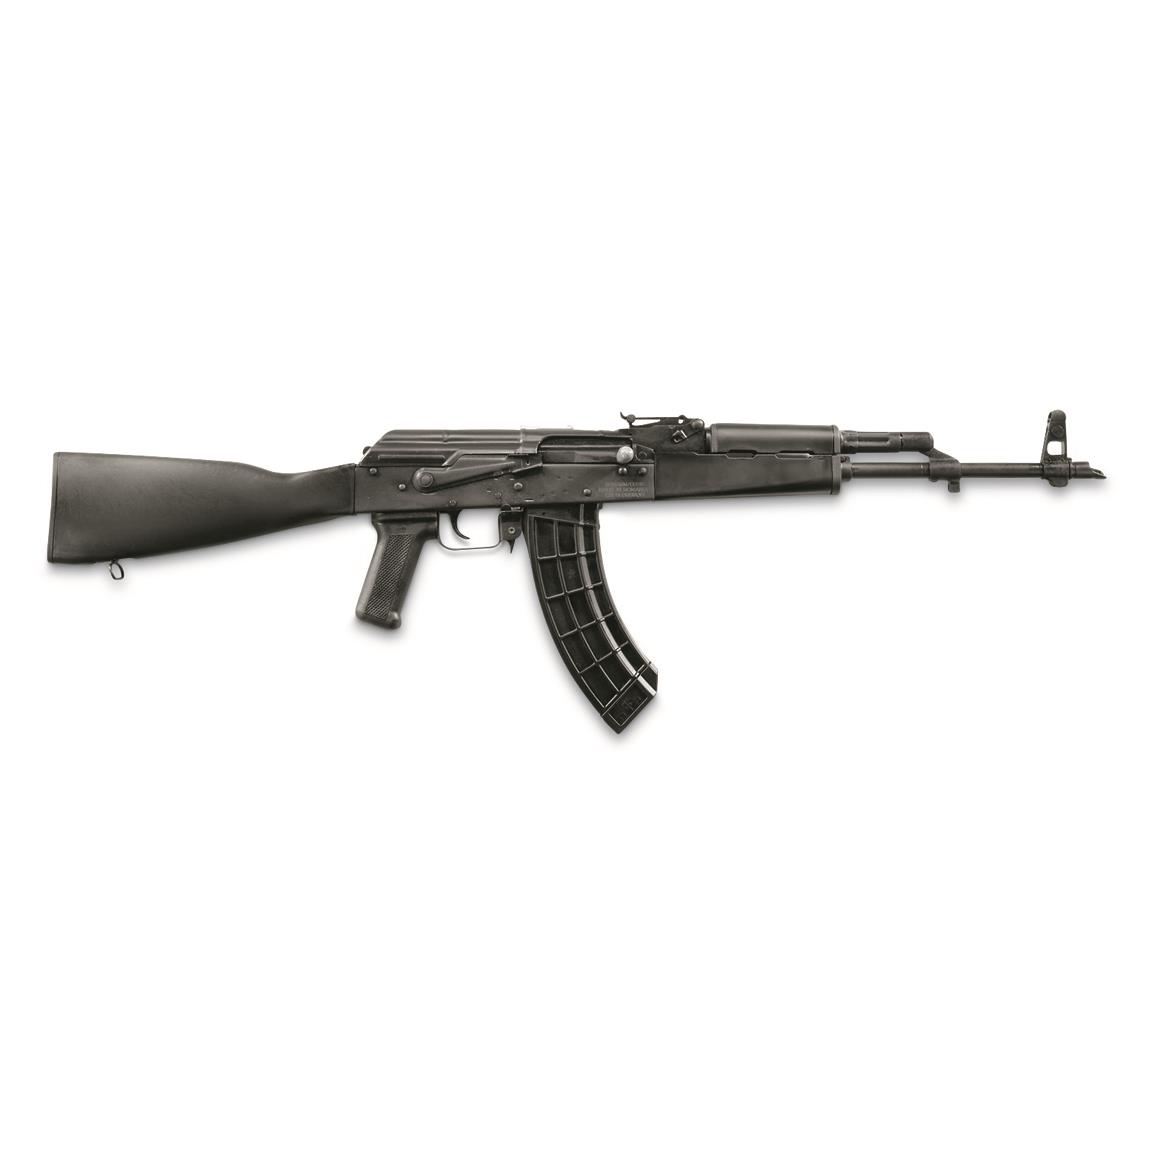 Century Arms WASR-10 V2 AK, Semi-Automatic, 7.62x39mm, 16.25" Barrel, 30+1 Rounds